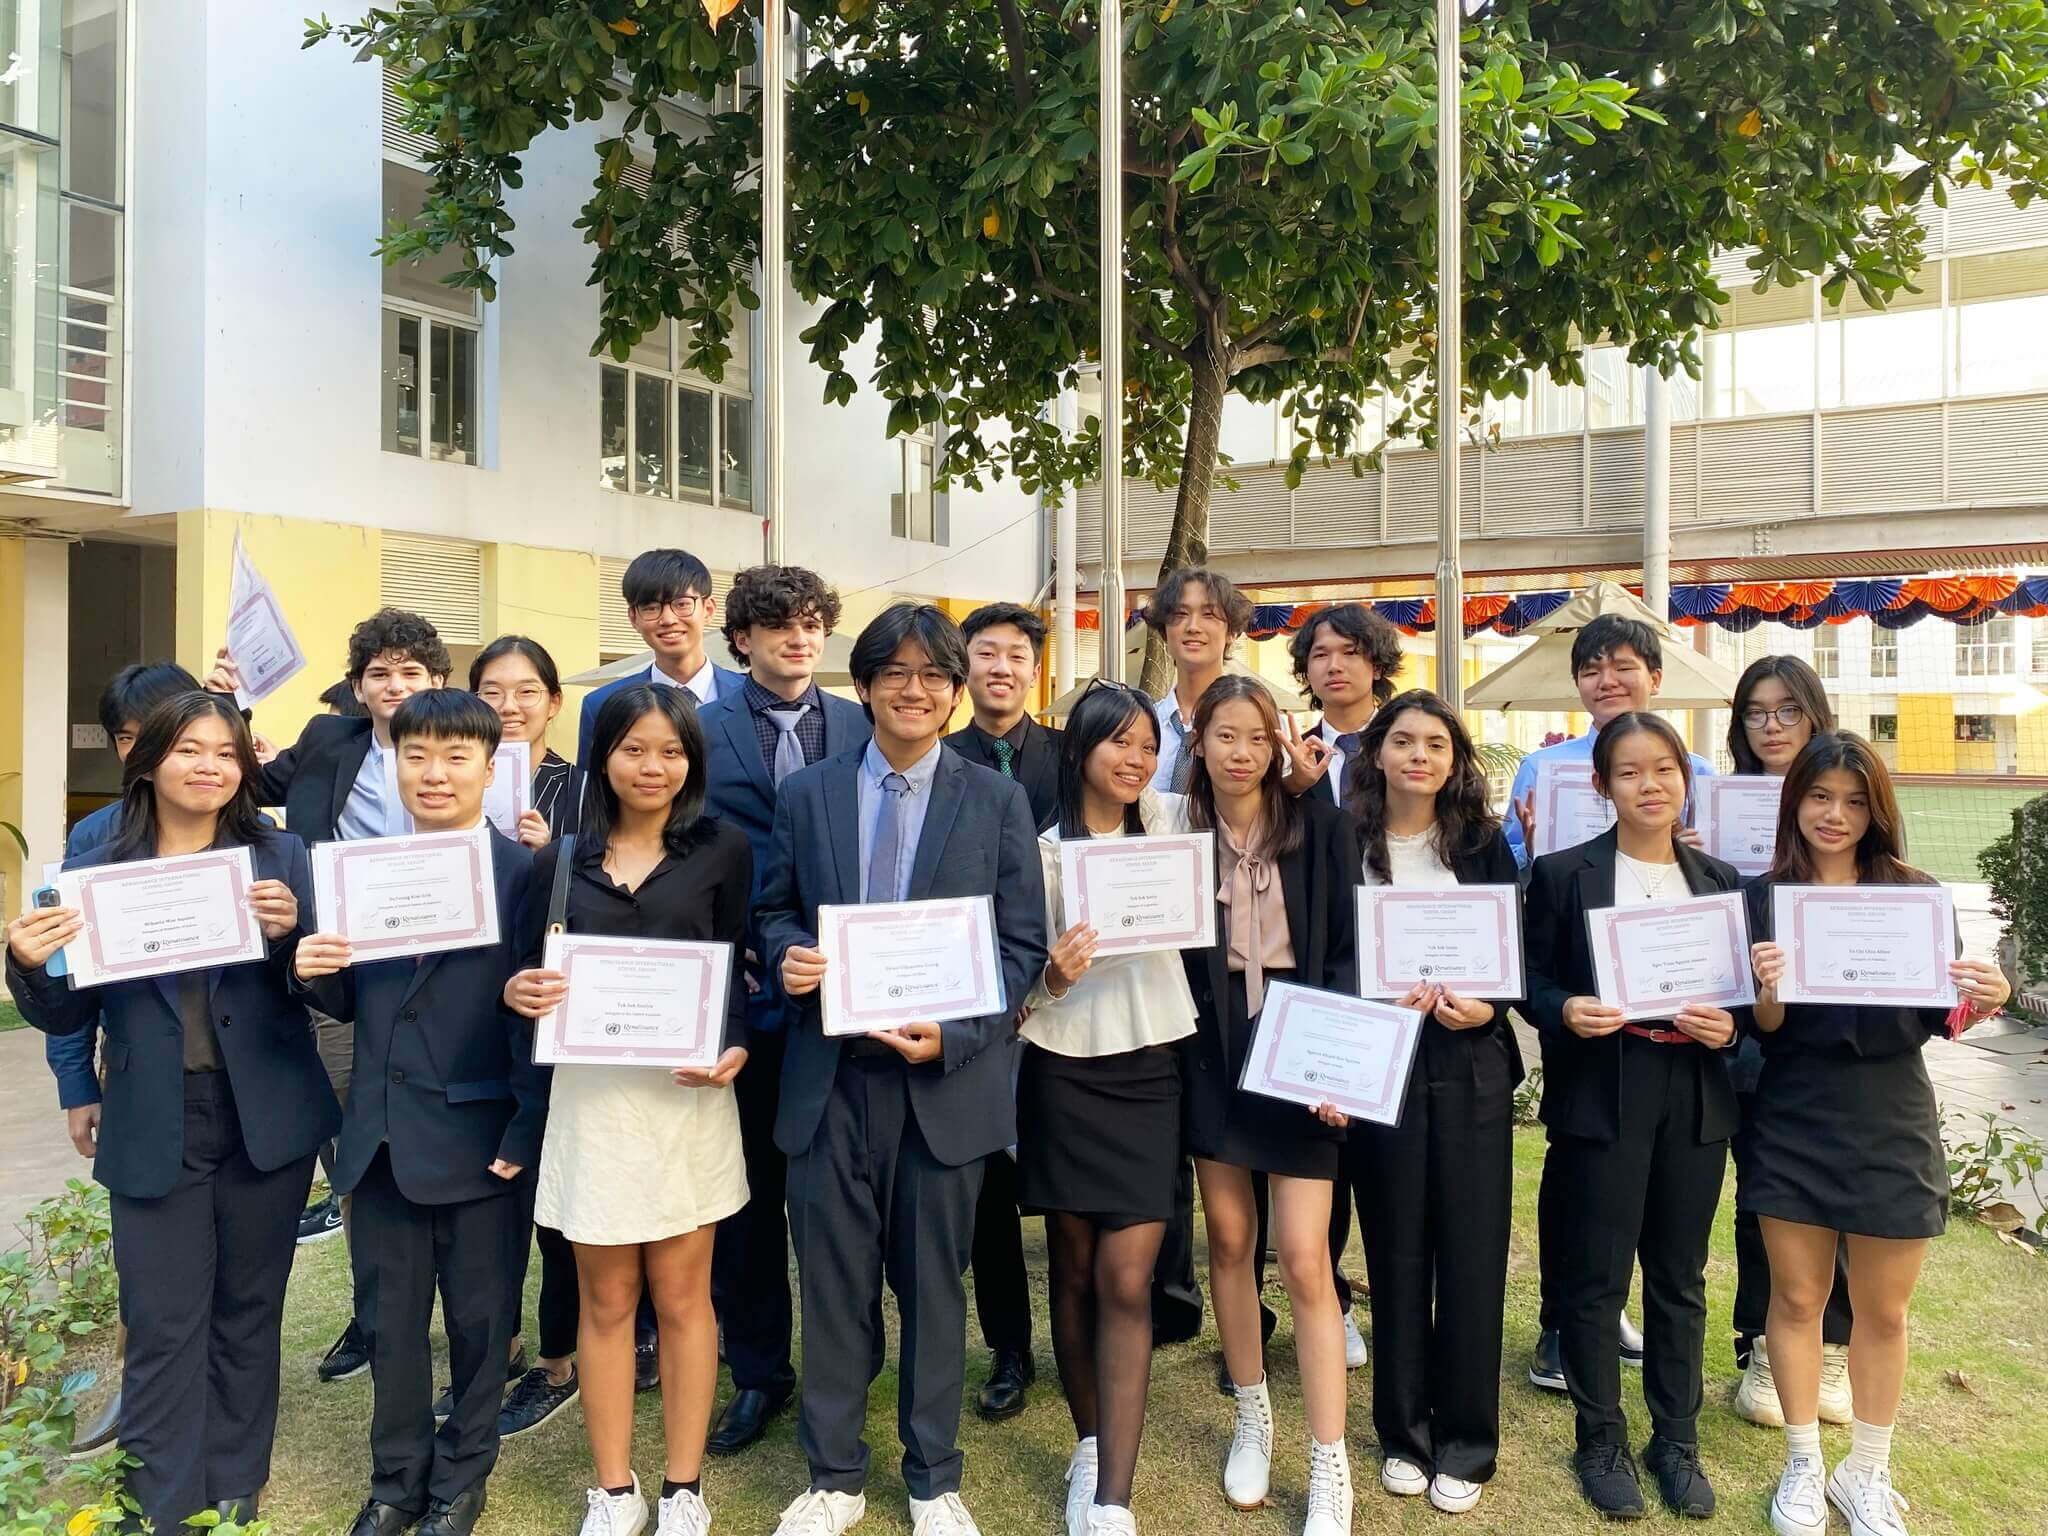 students at ISHCMC have achieved their academic goals